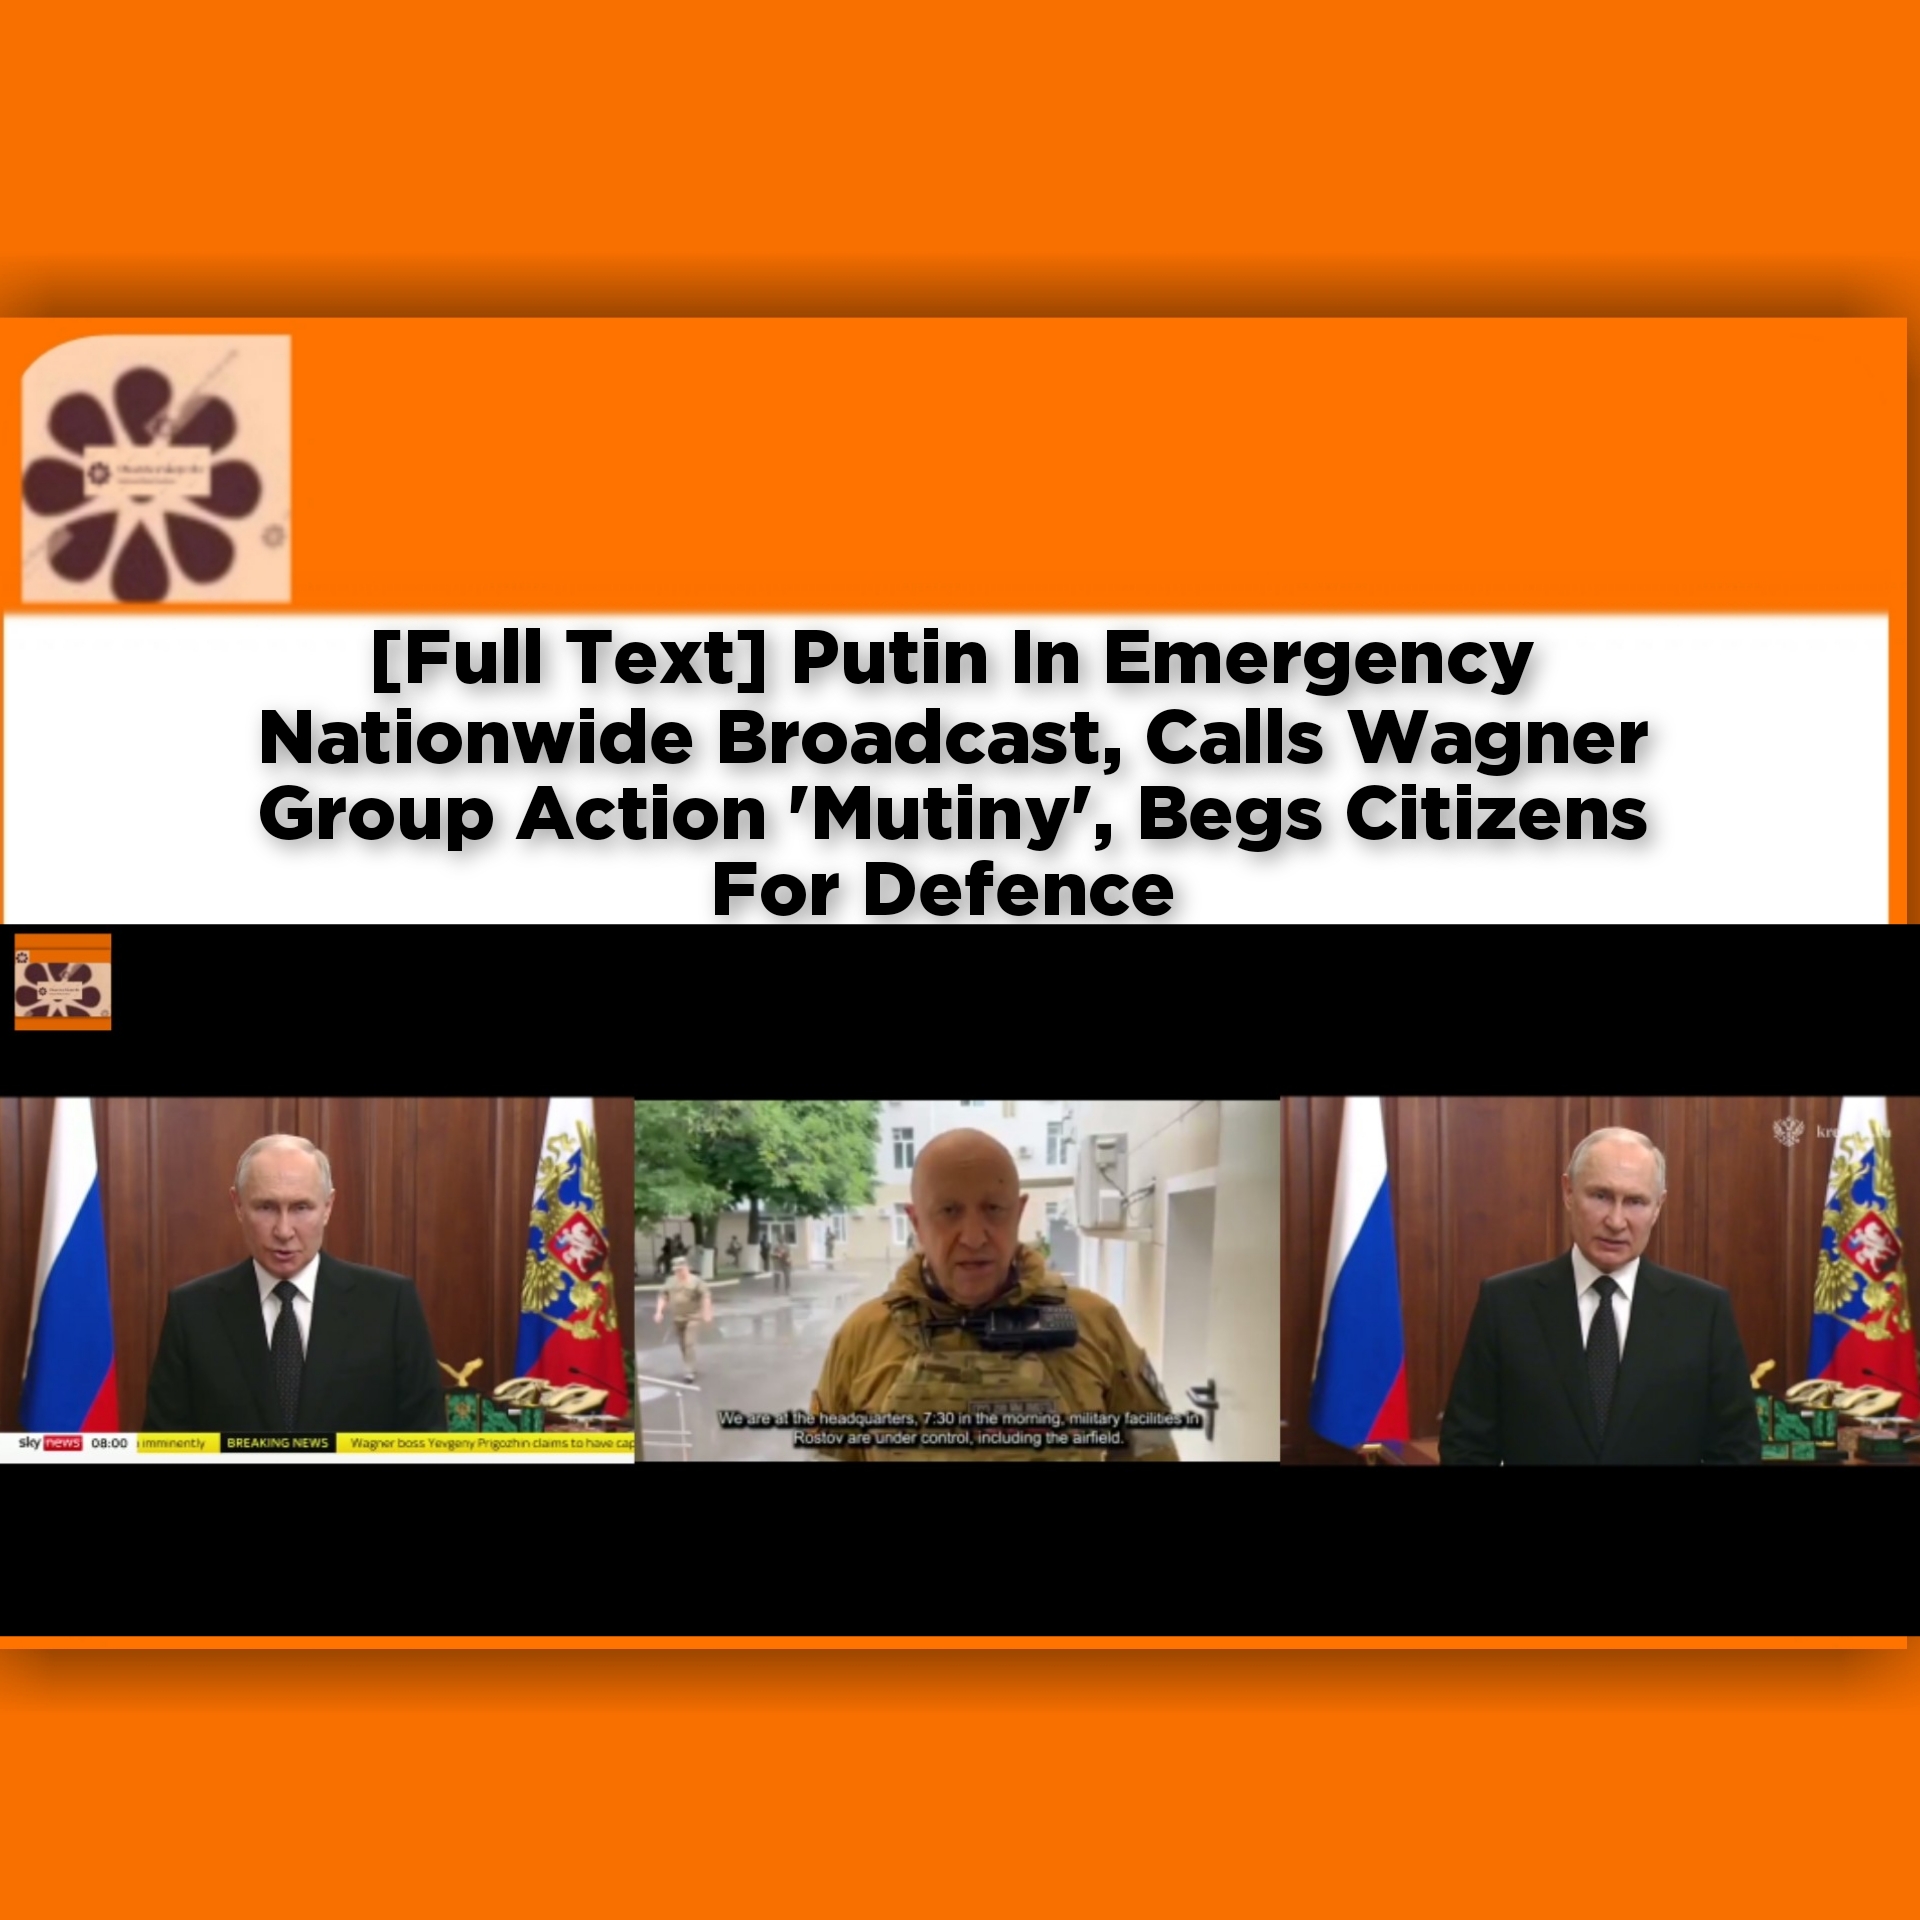 [Full Text] Putin In Emergency Nationwide Broadcast, Calls Wagner Group Action 'Mutiny', Begs Citizens For Defence ~ OsazuwaAkonedo #Moscow #Prigozhin #Rostov #Russia #Ukraine #Wagner #Yevgeny